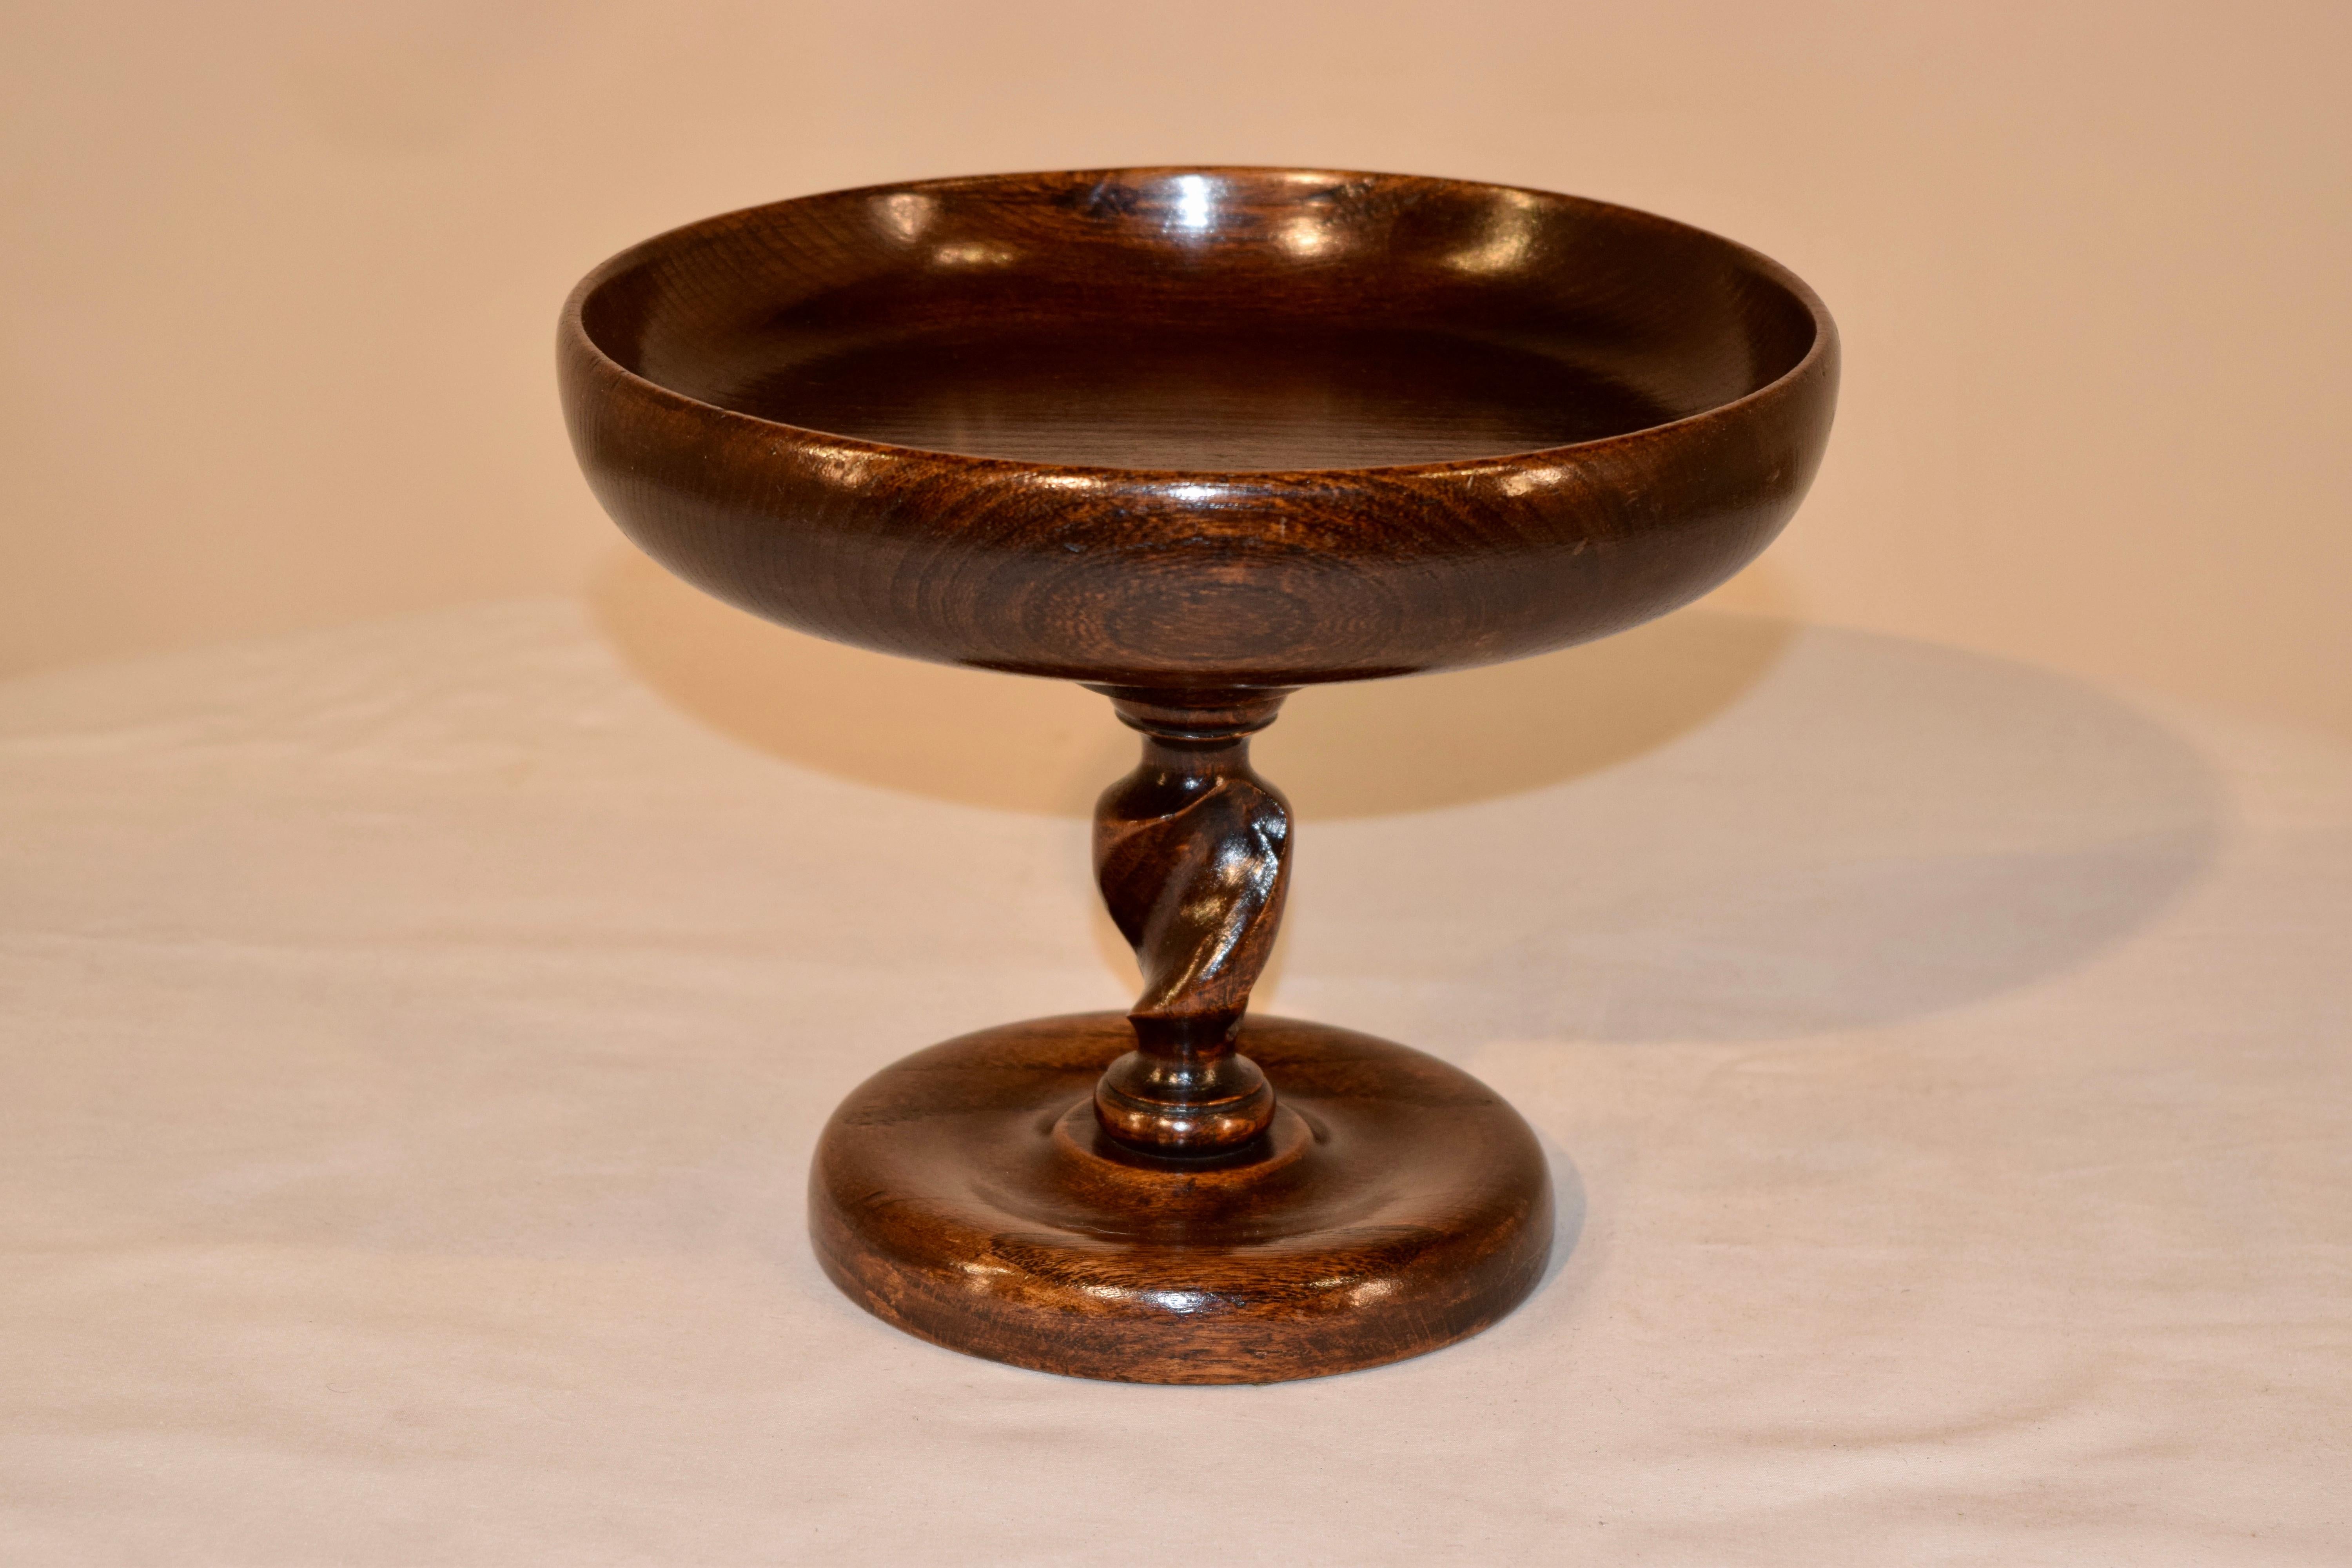 19th century oak compote from England with a hand-turned bowl, supported on a barley twist column and hand-turned base.